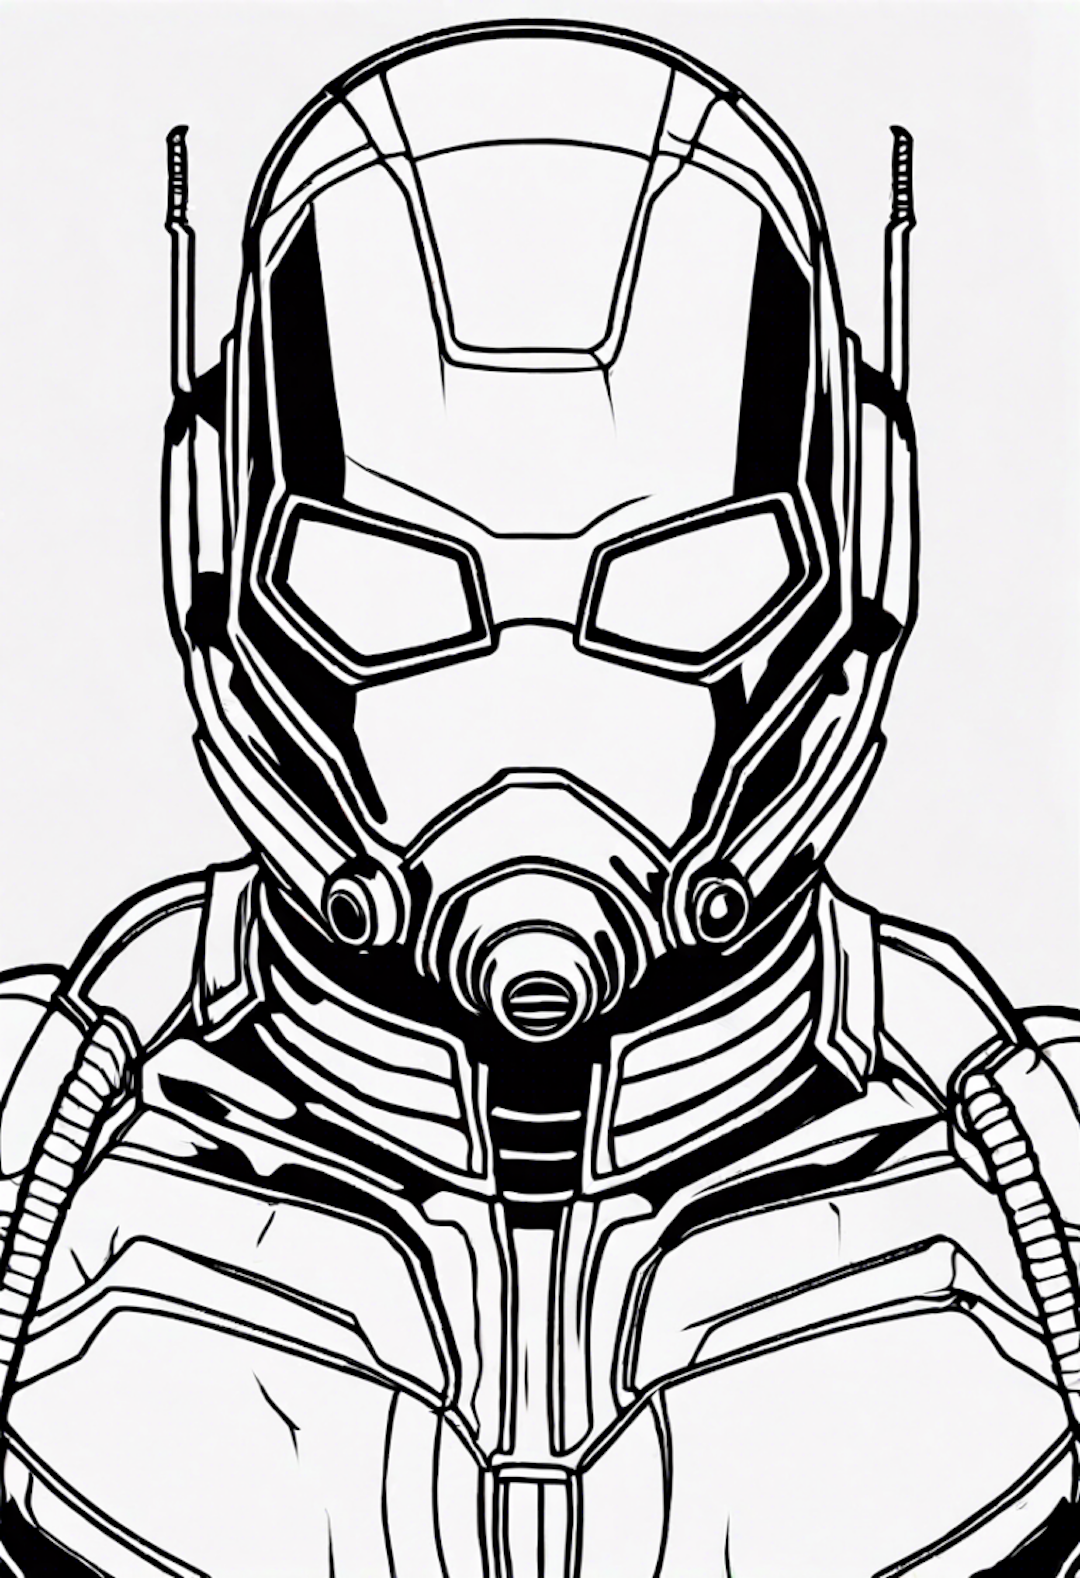 Ant-Man Coloring Adventure coloring pages